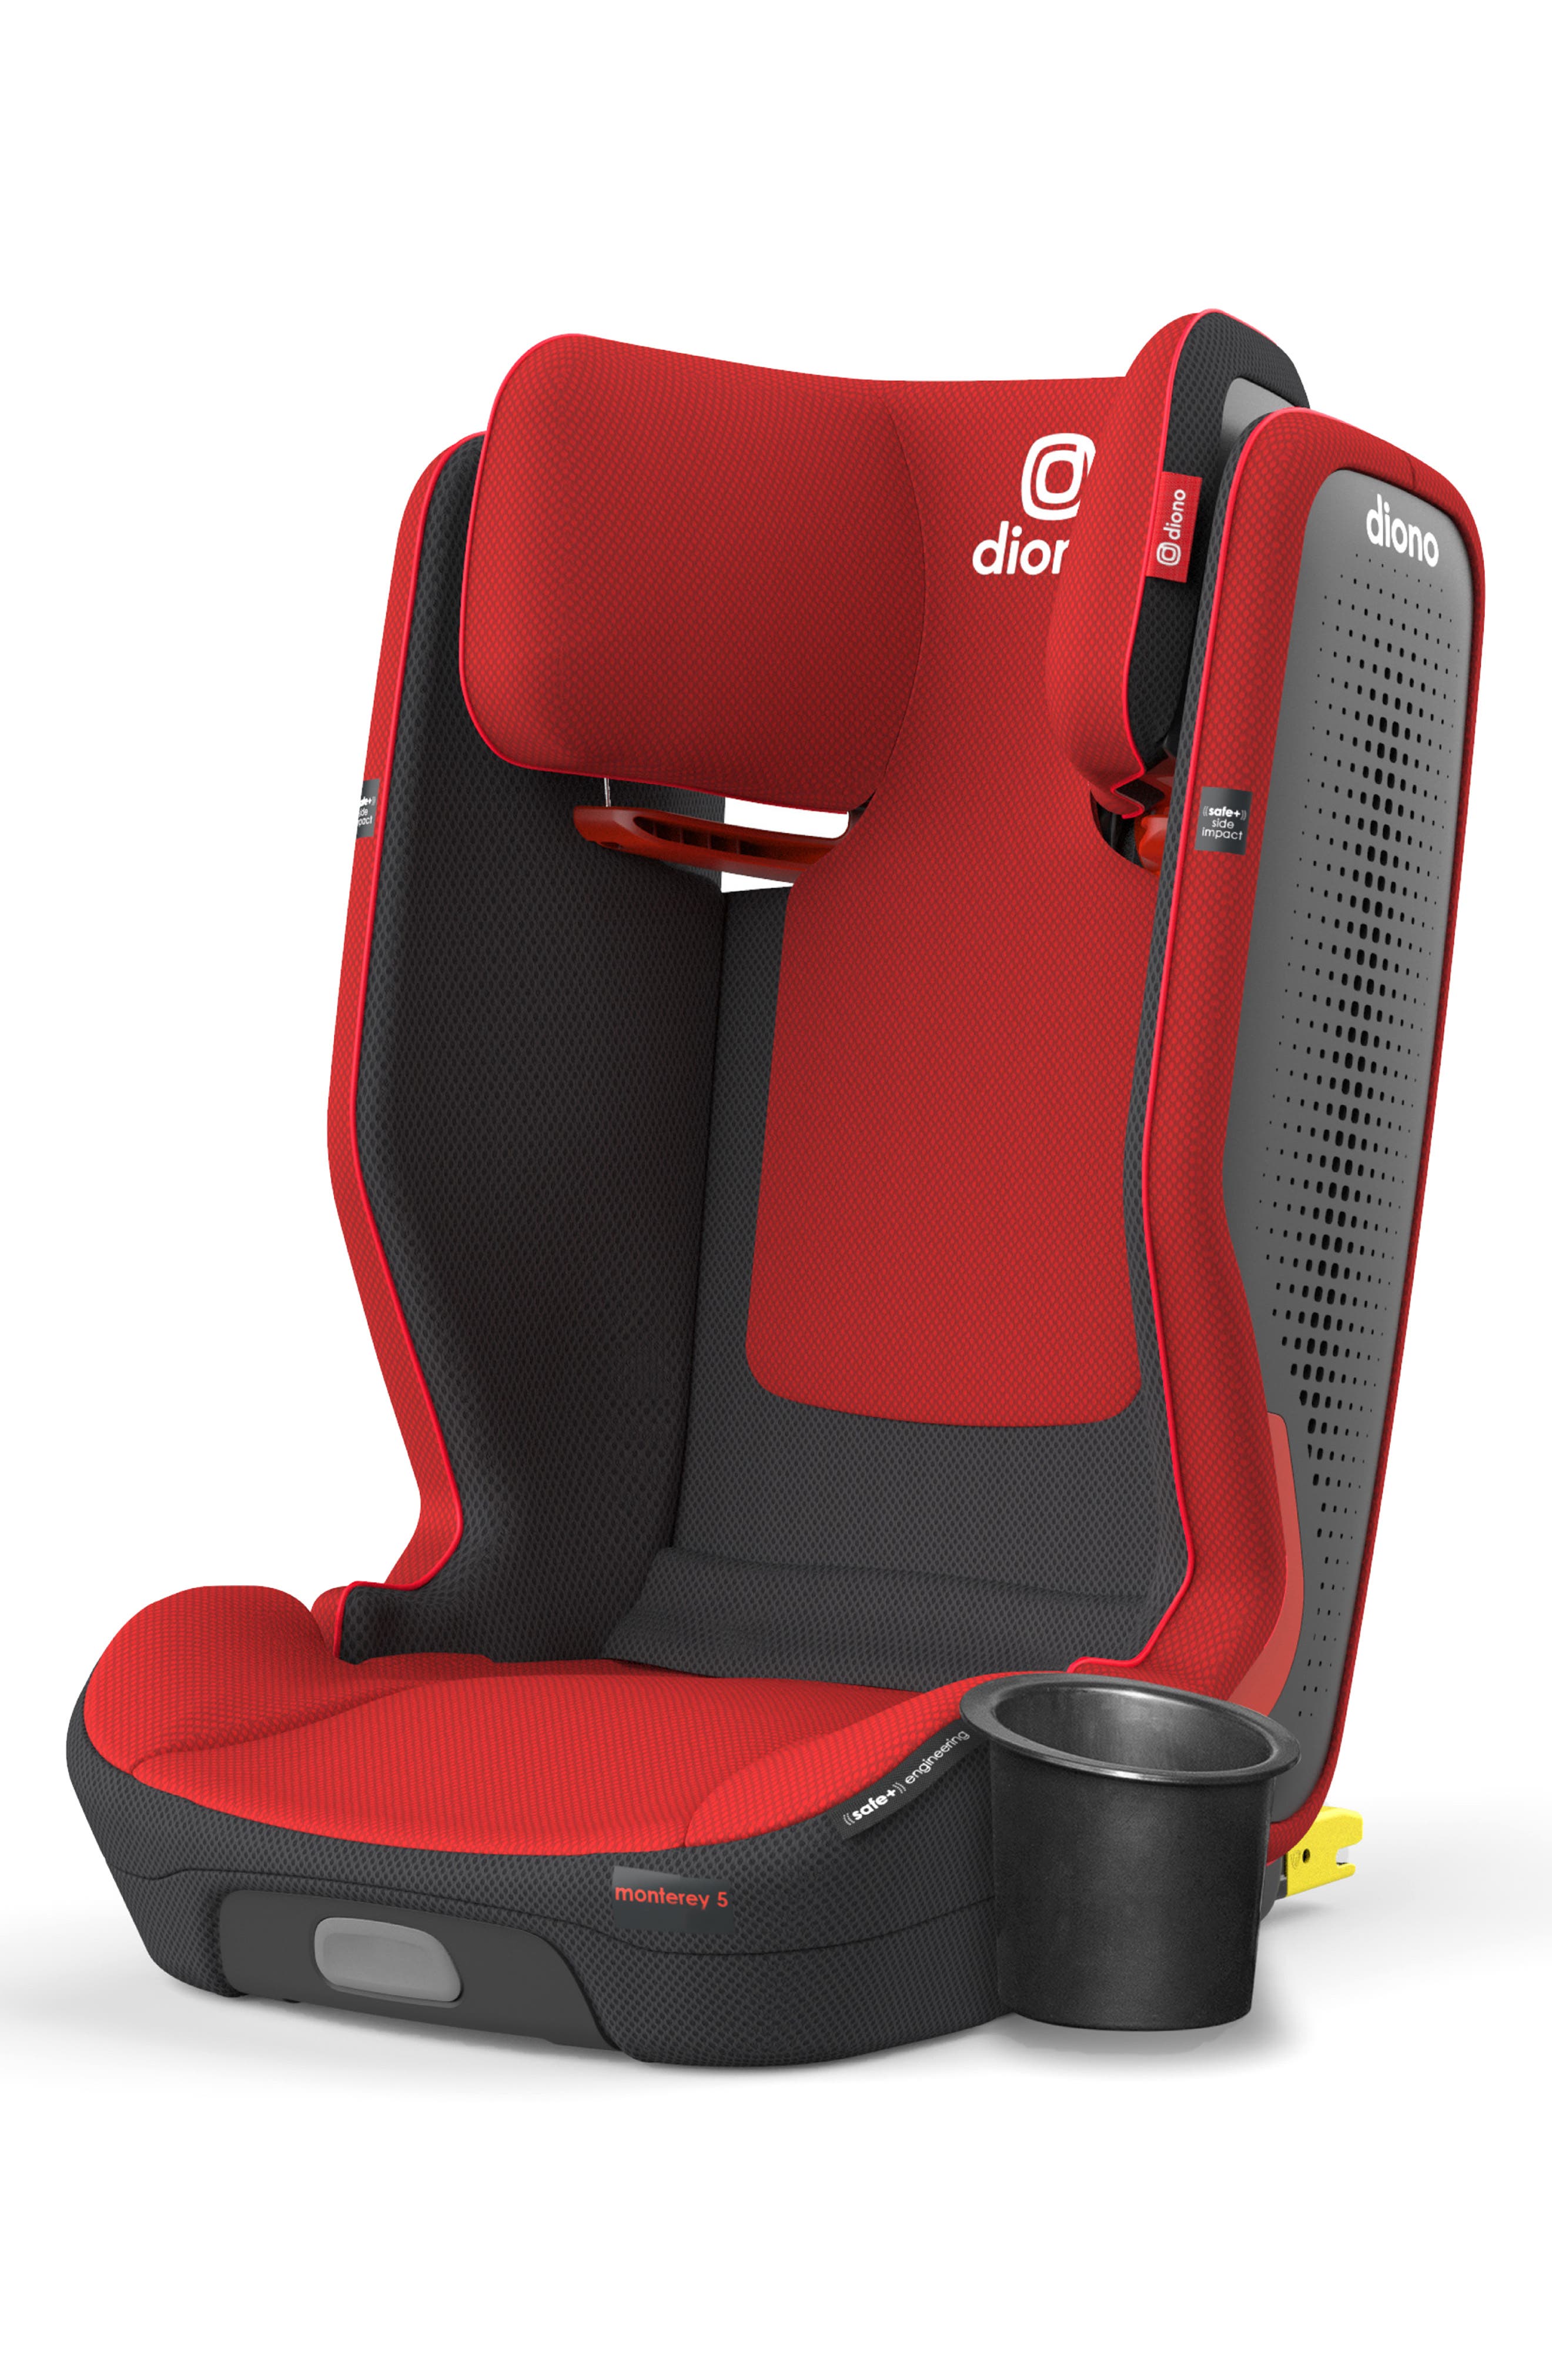 Diono Monterey 5iST FixSafe(TM) Latch Fold-Up Portable Expandable Booster Car Seat in Red Cherry